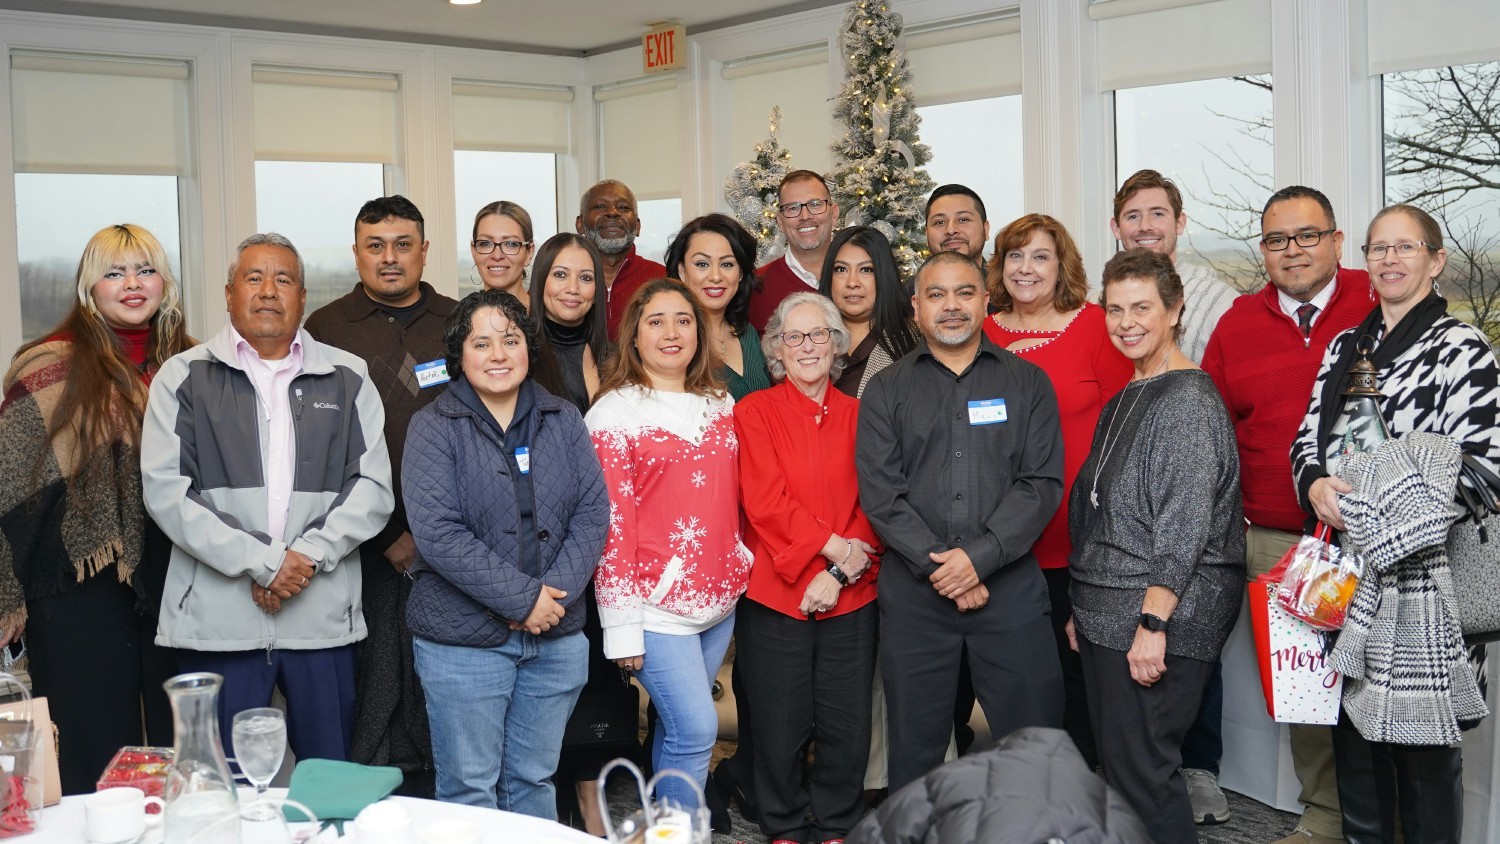 Jel Sert employees gathered together for our holiday party and have a fun afternoon filled with laughs & raffle prizes.